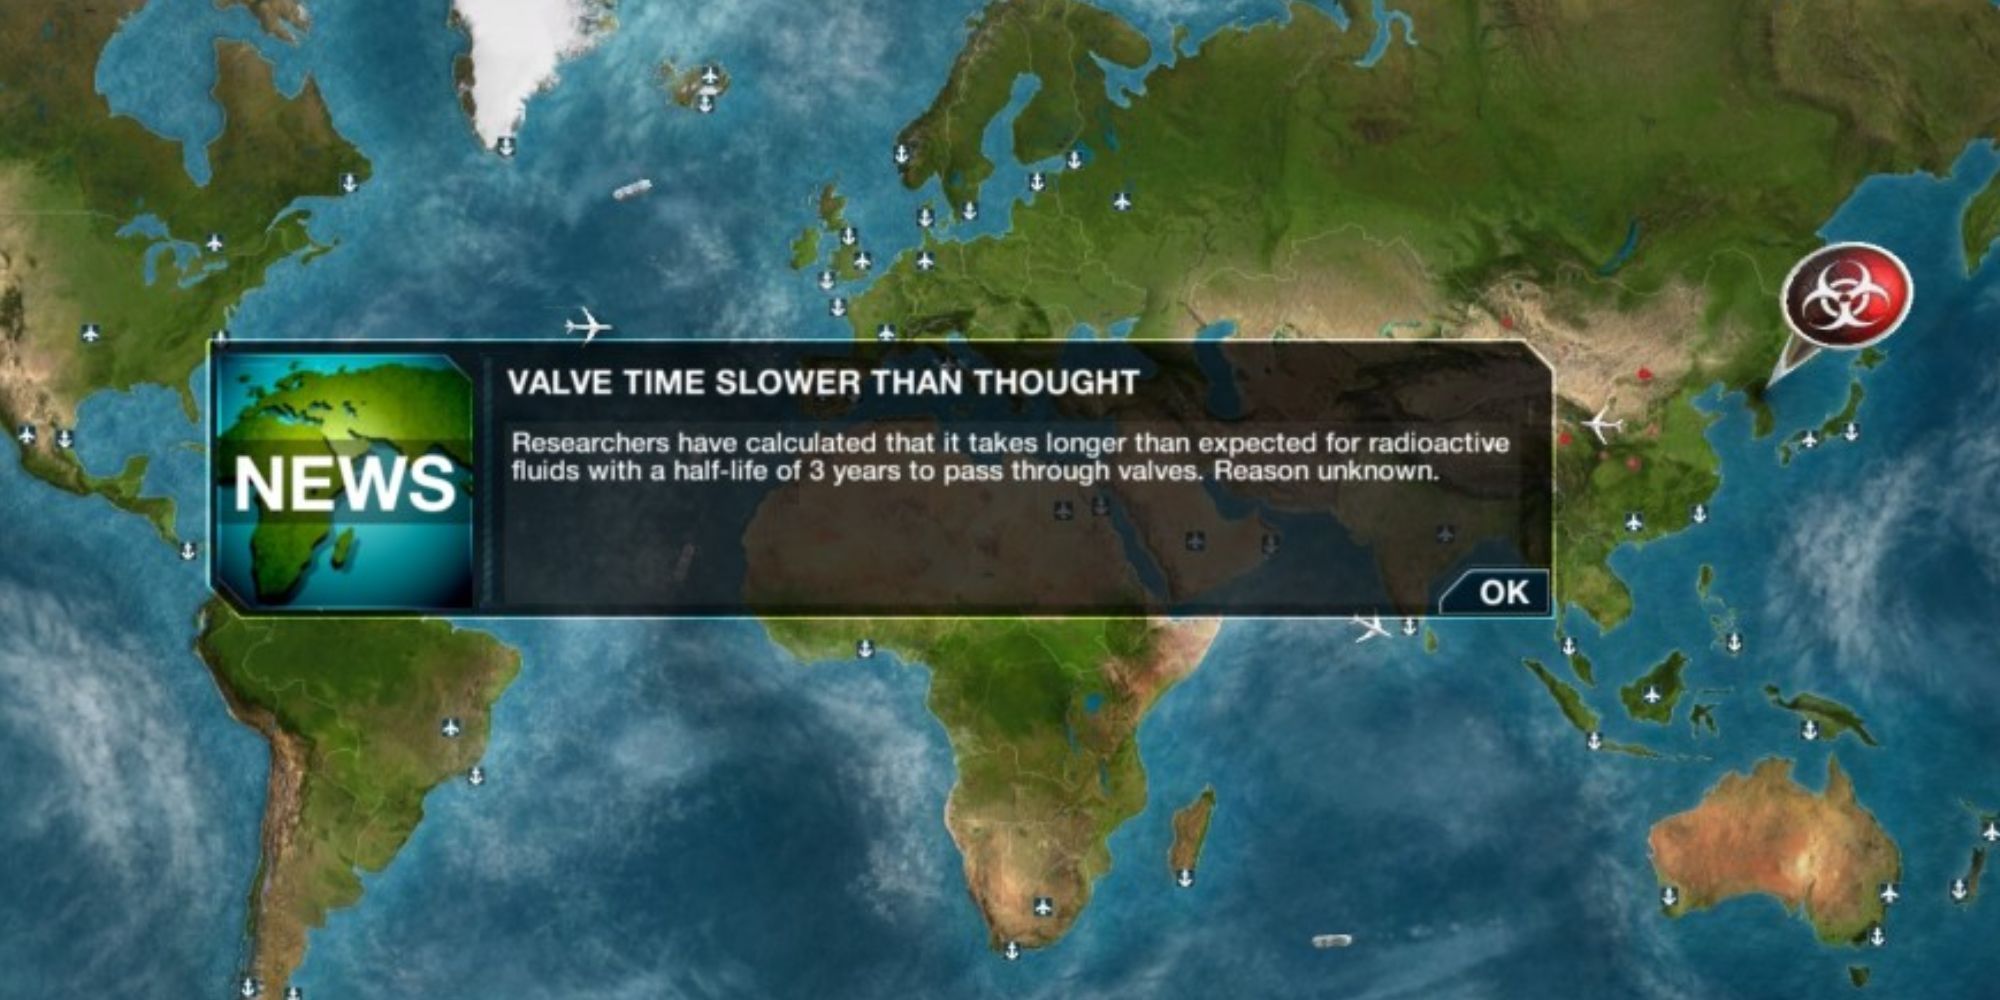 A Valve Time news update appears against a top down view of the globe